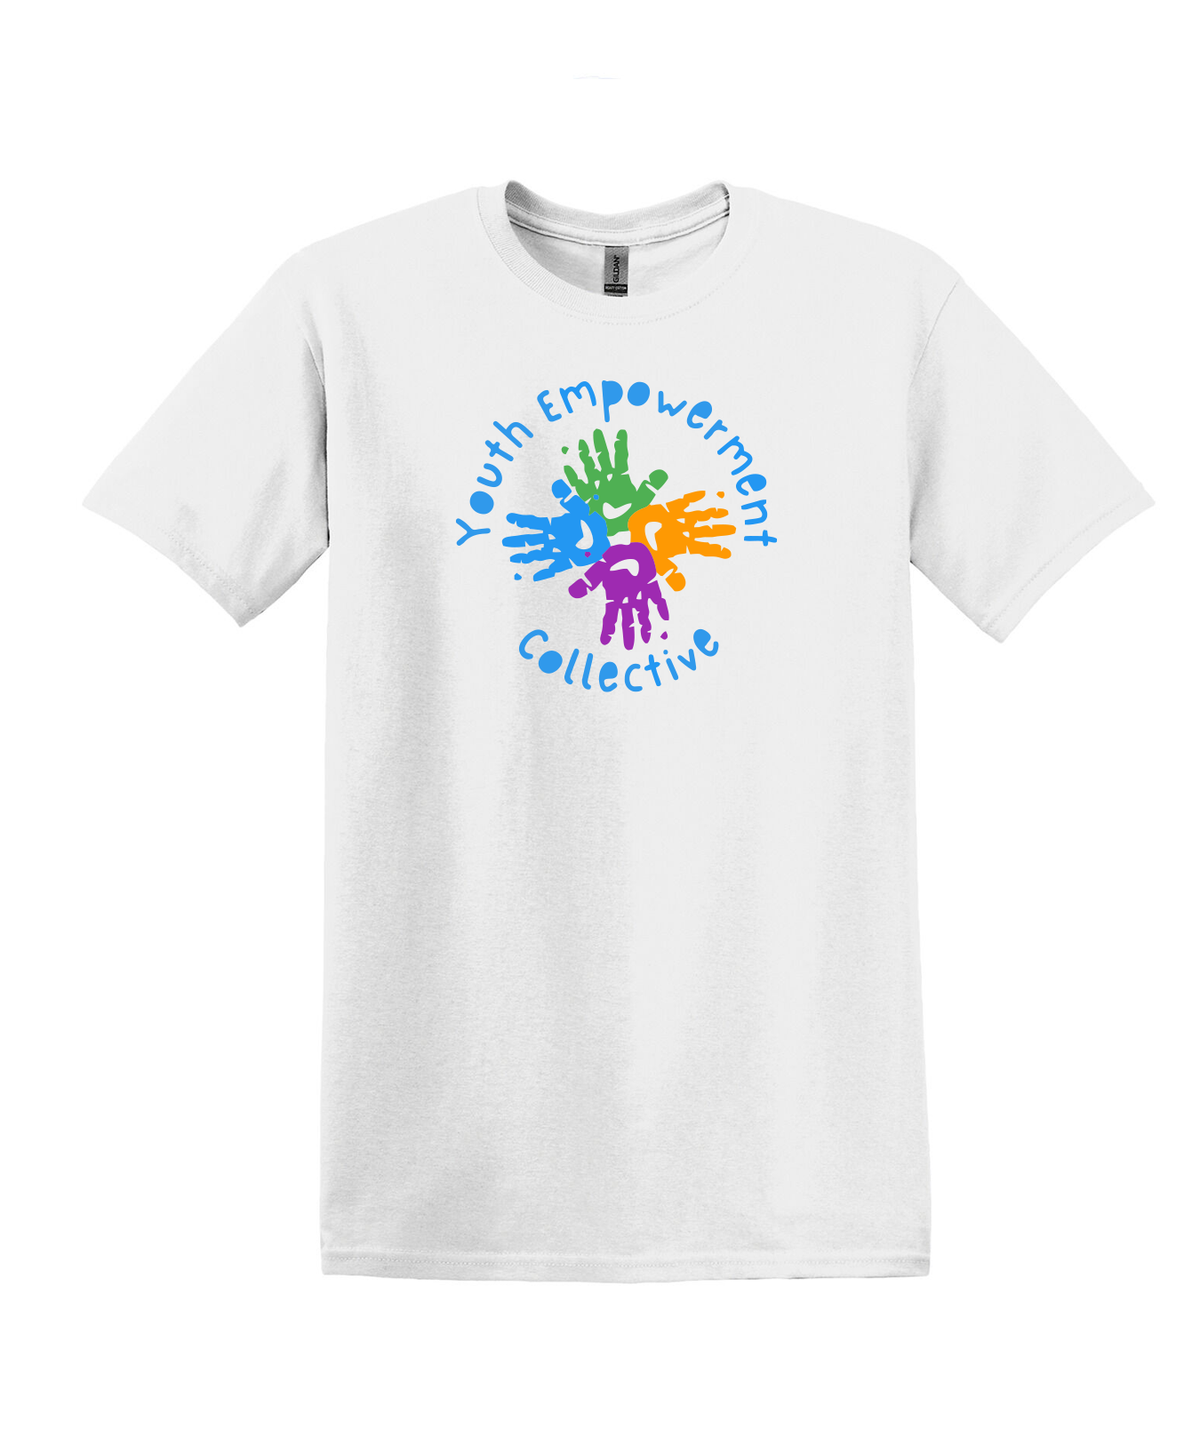 Youth Empowerment Collective T-shirt